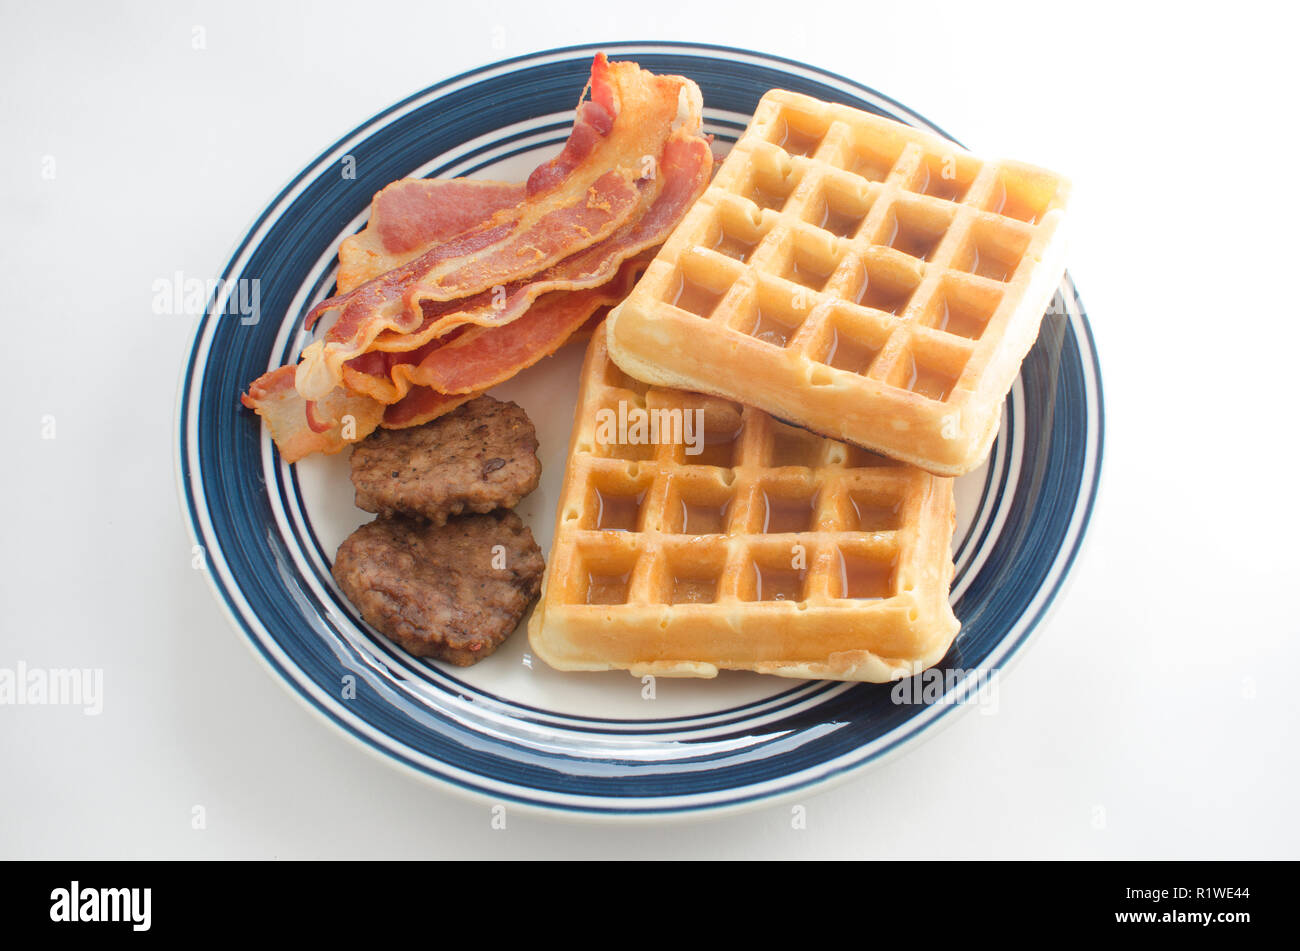 Plate of waffles with maple syrup, sausage patties and bacon strips Stock Photo